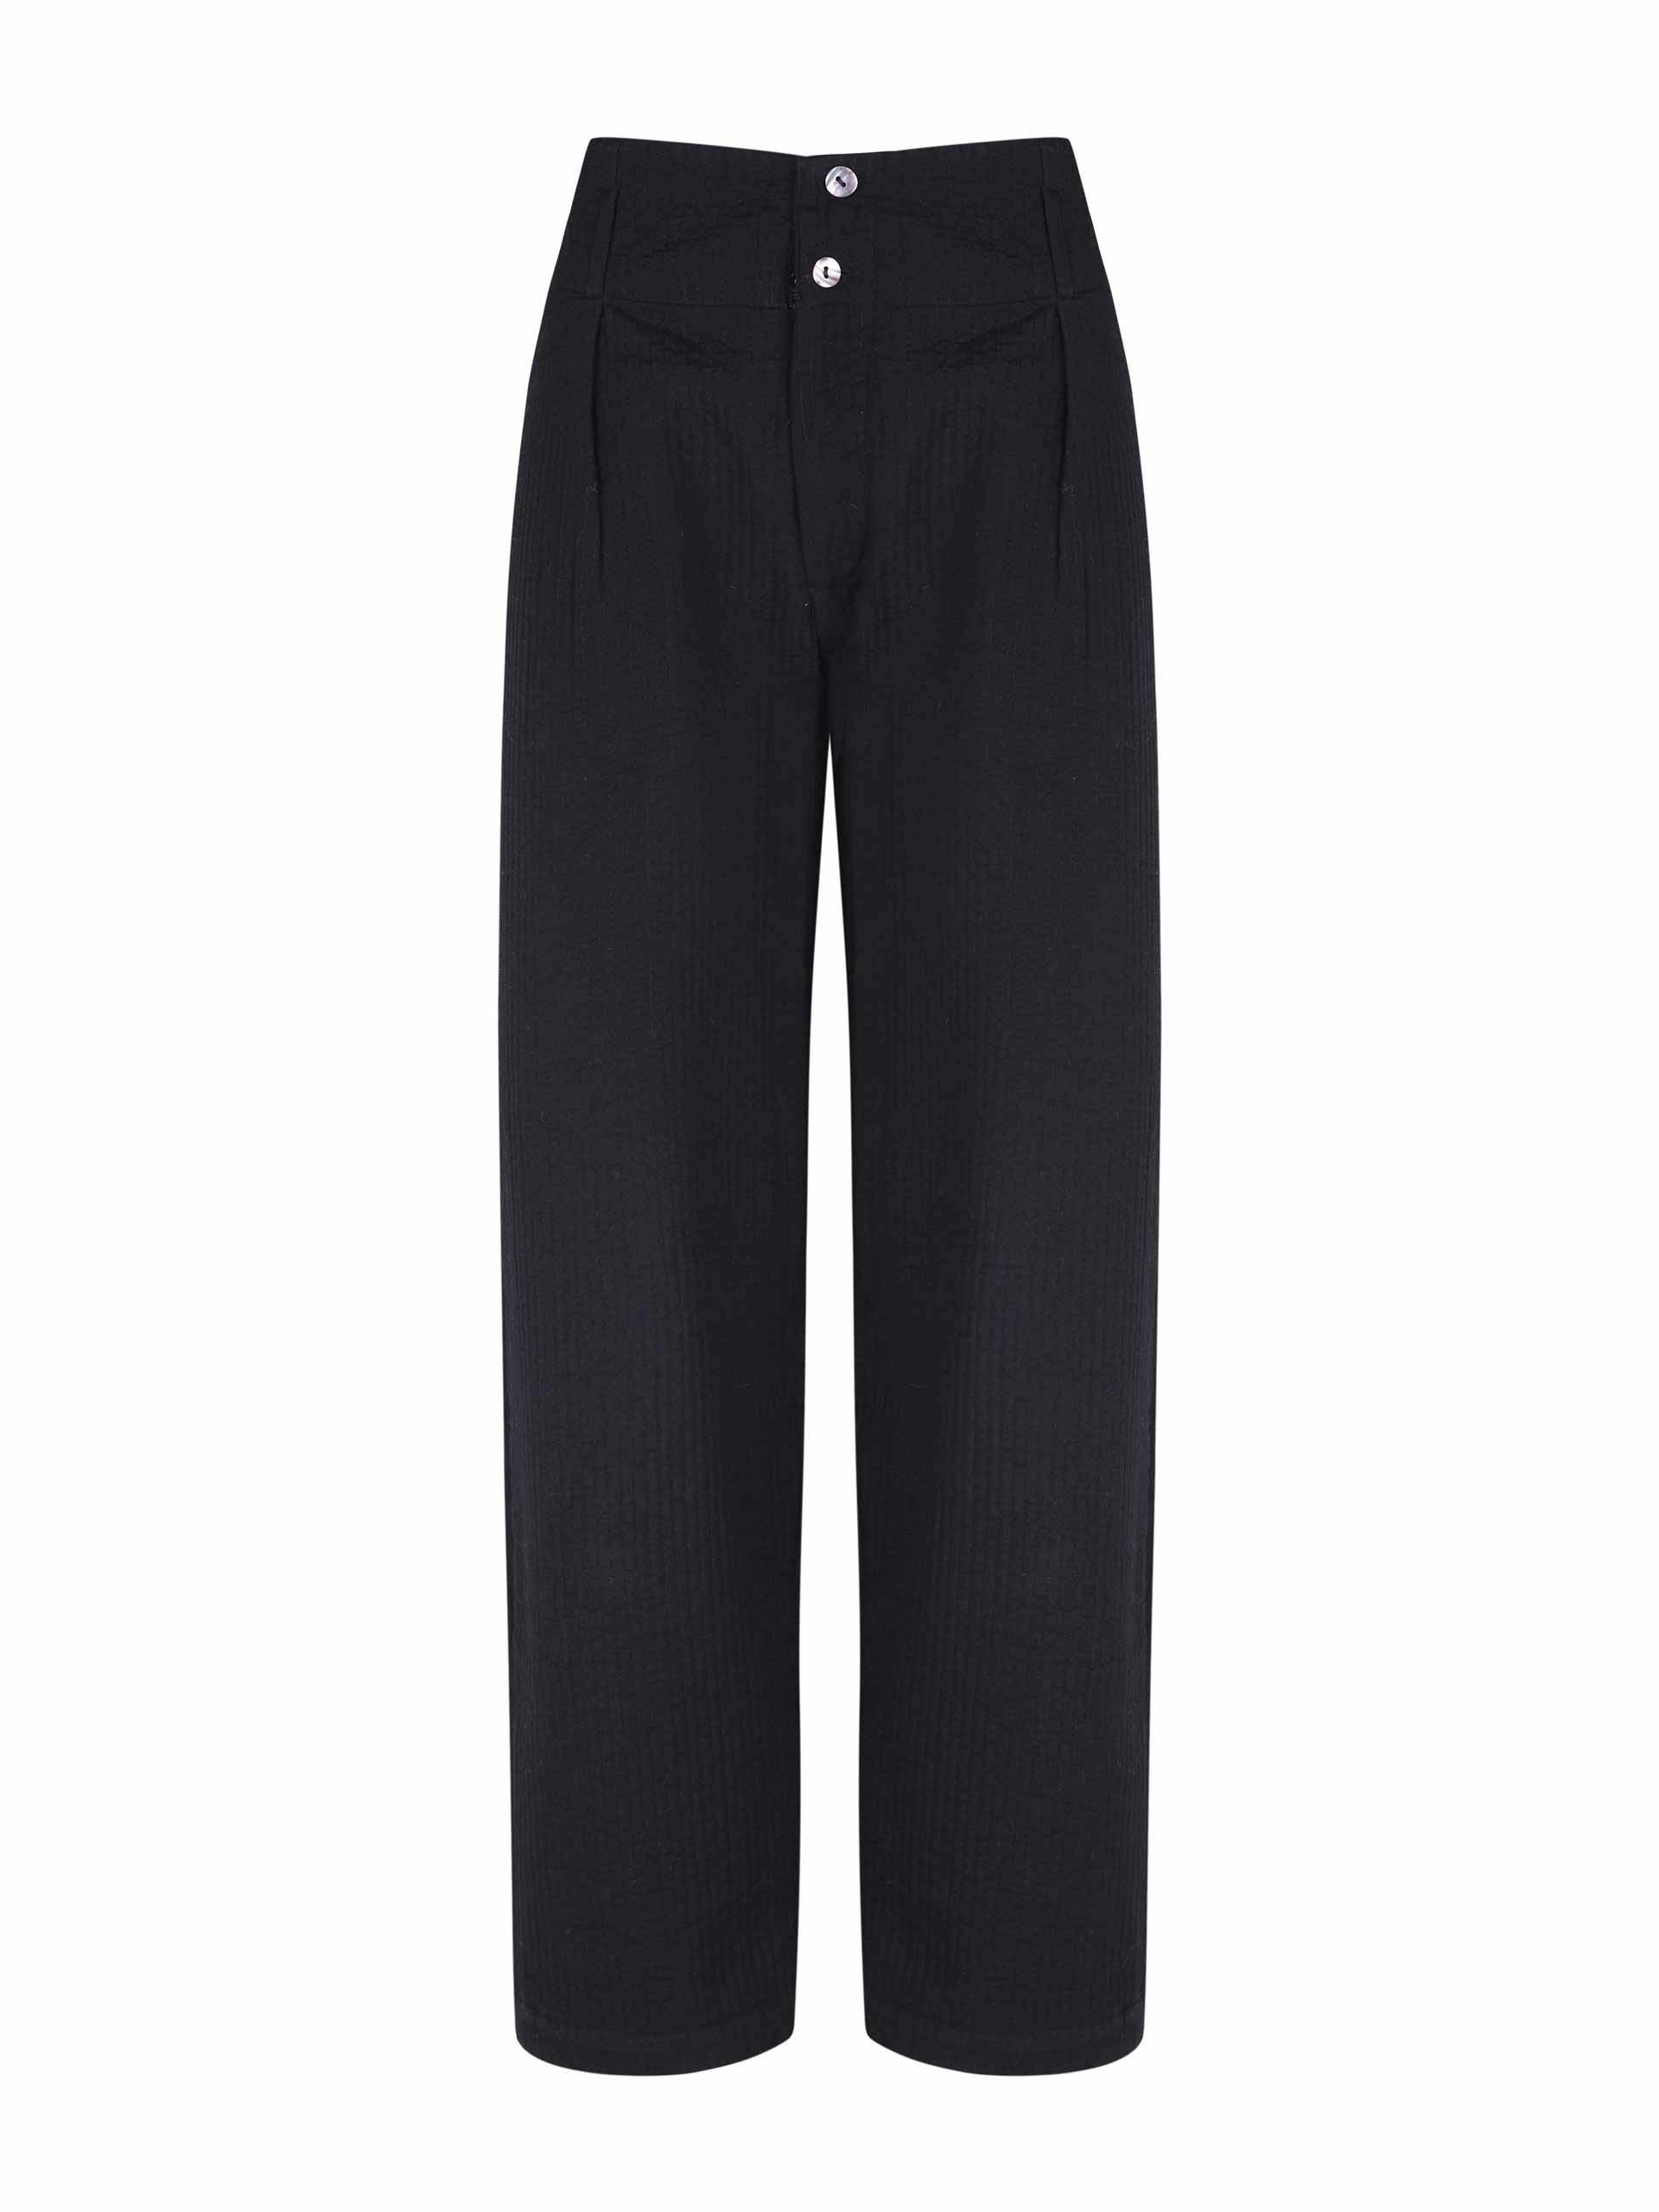 Straight-legged tailored trousers